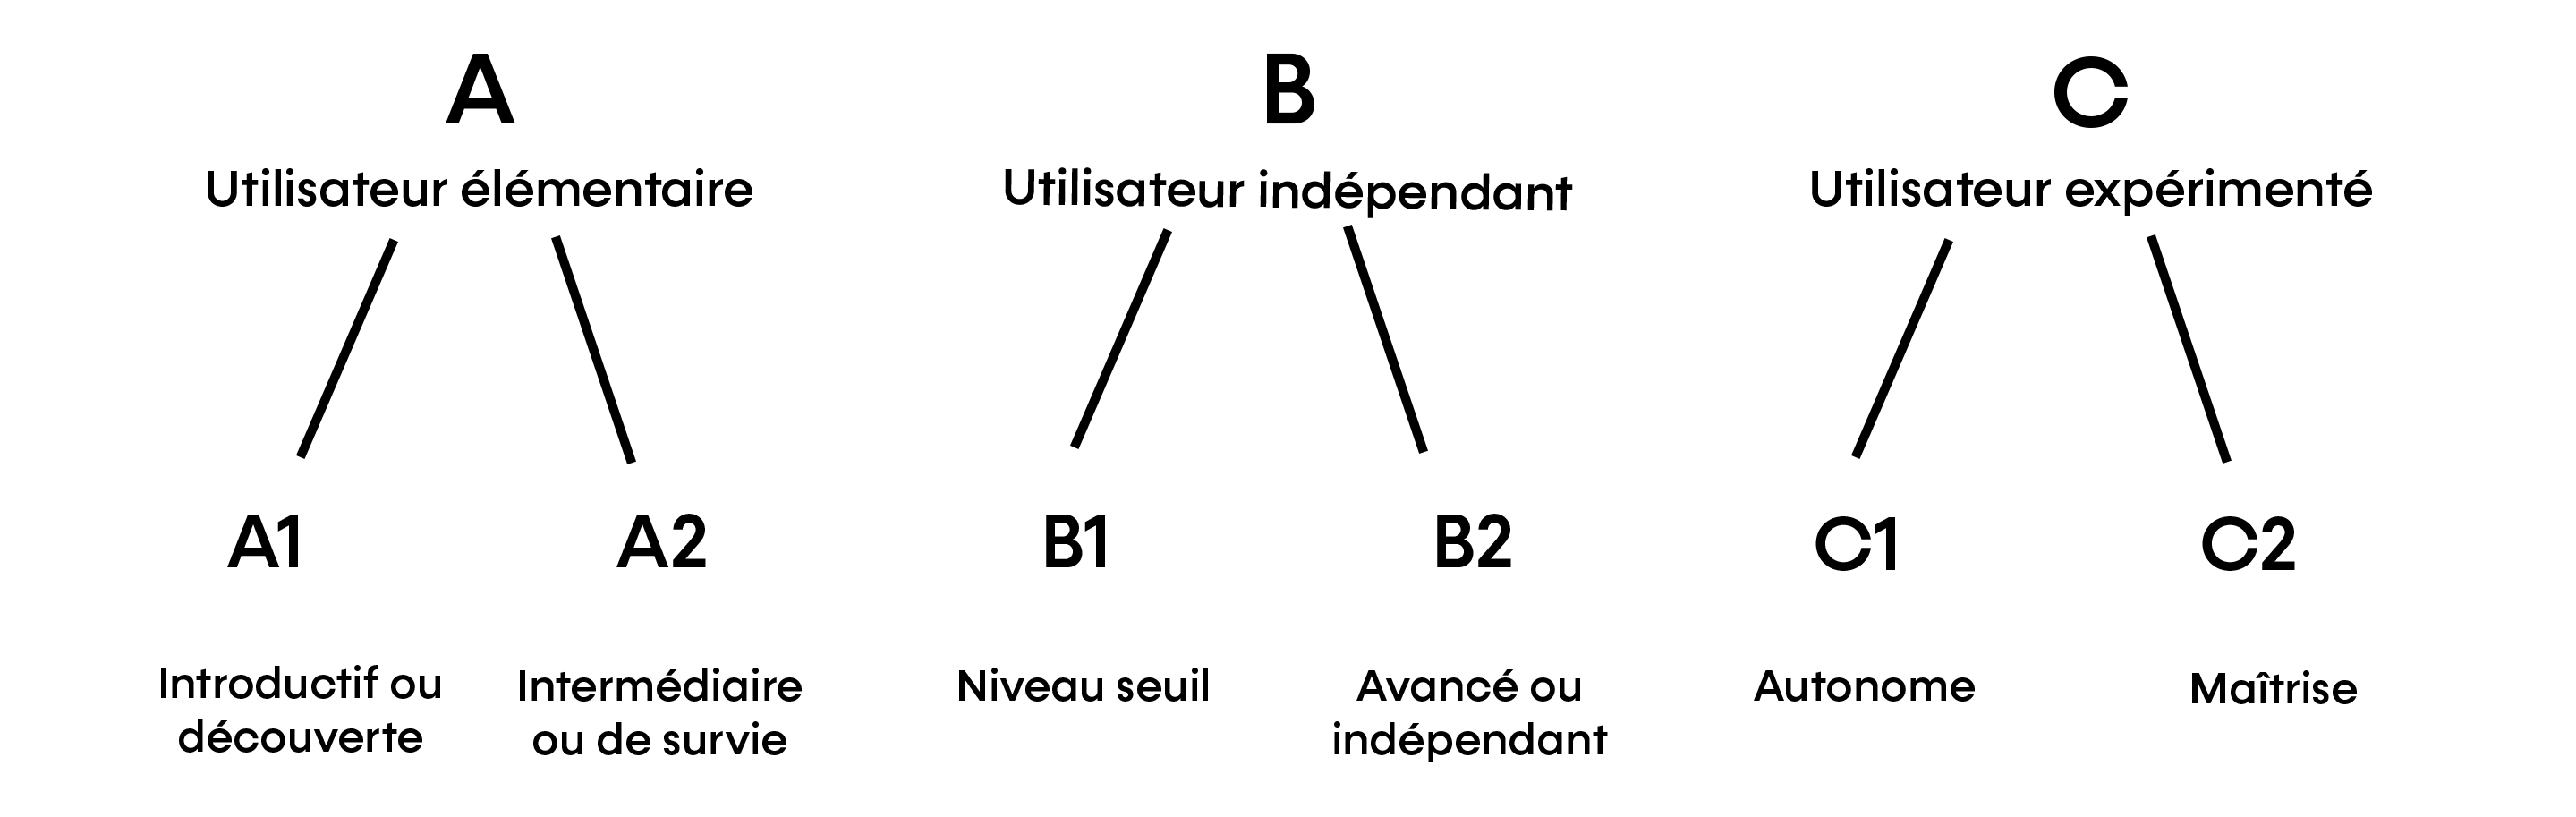 CEFR_Tree structure in three general levels